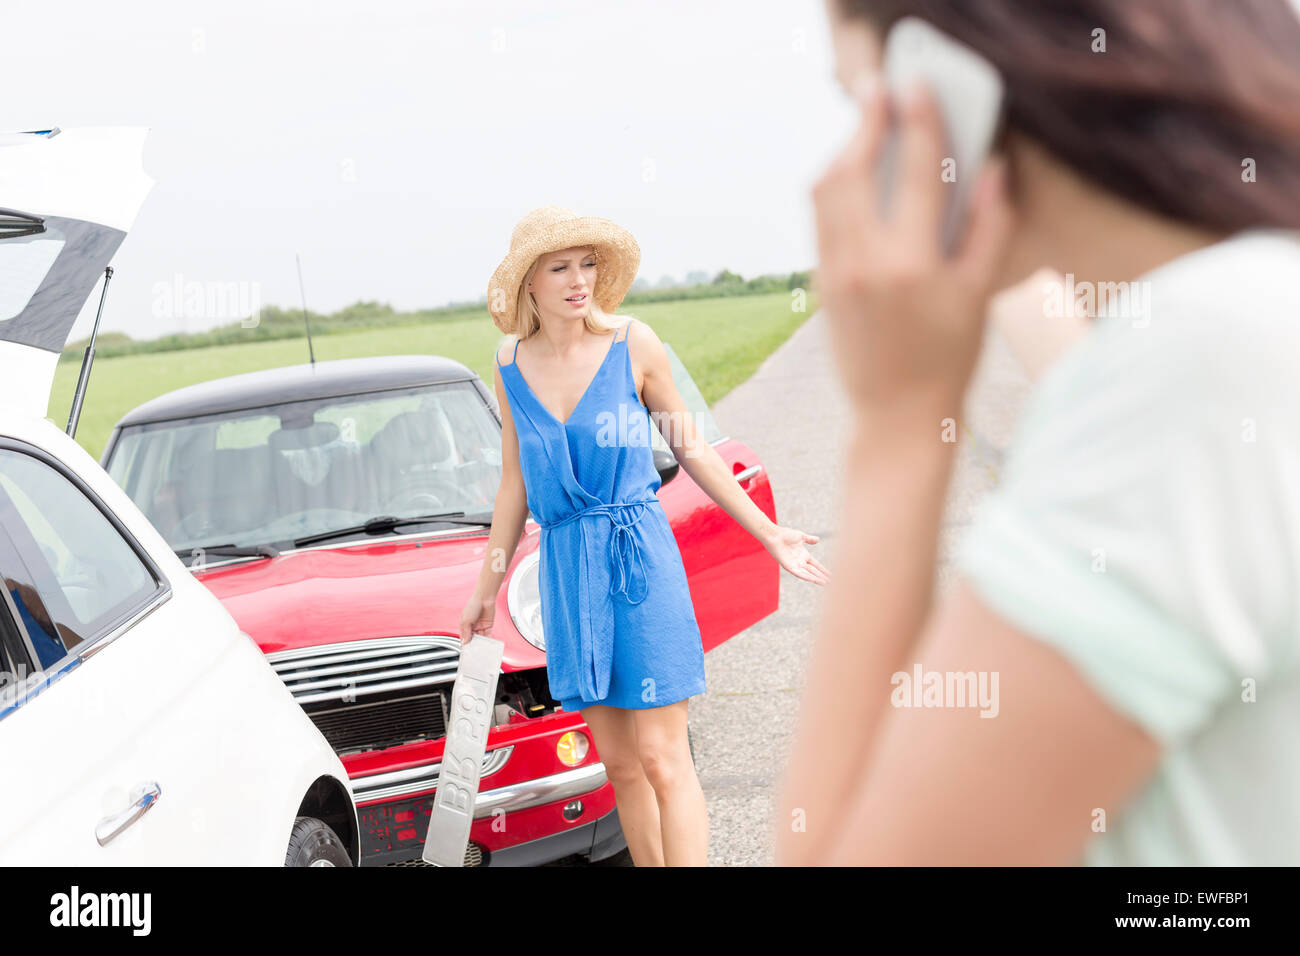 Angry woman standing by damaged cars with female using cell phone in foreground Stock Photo